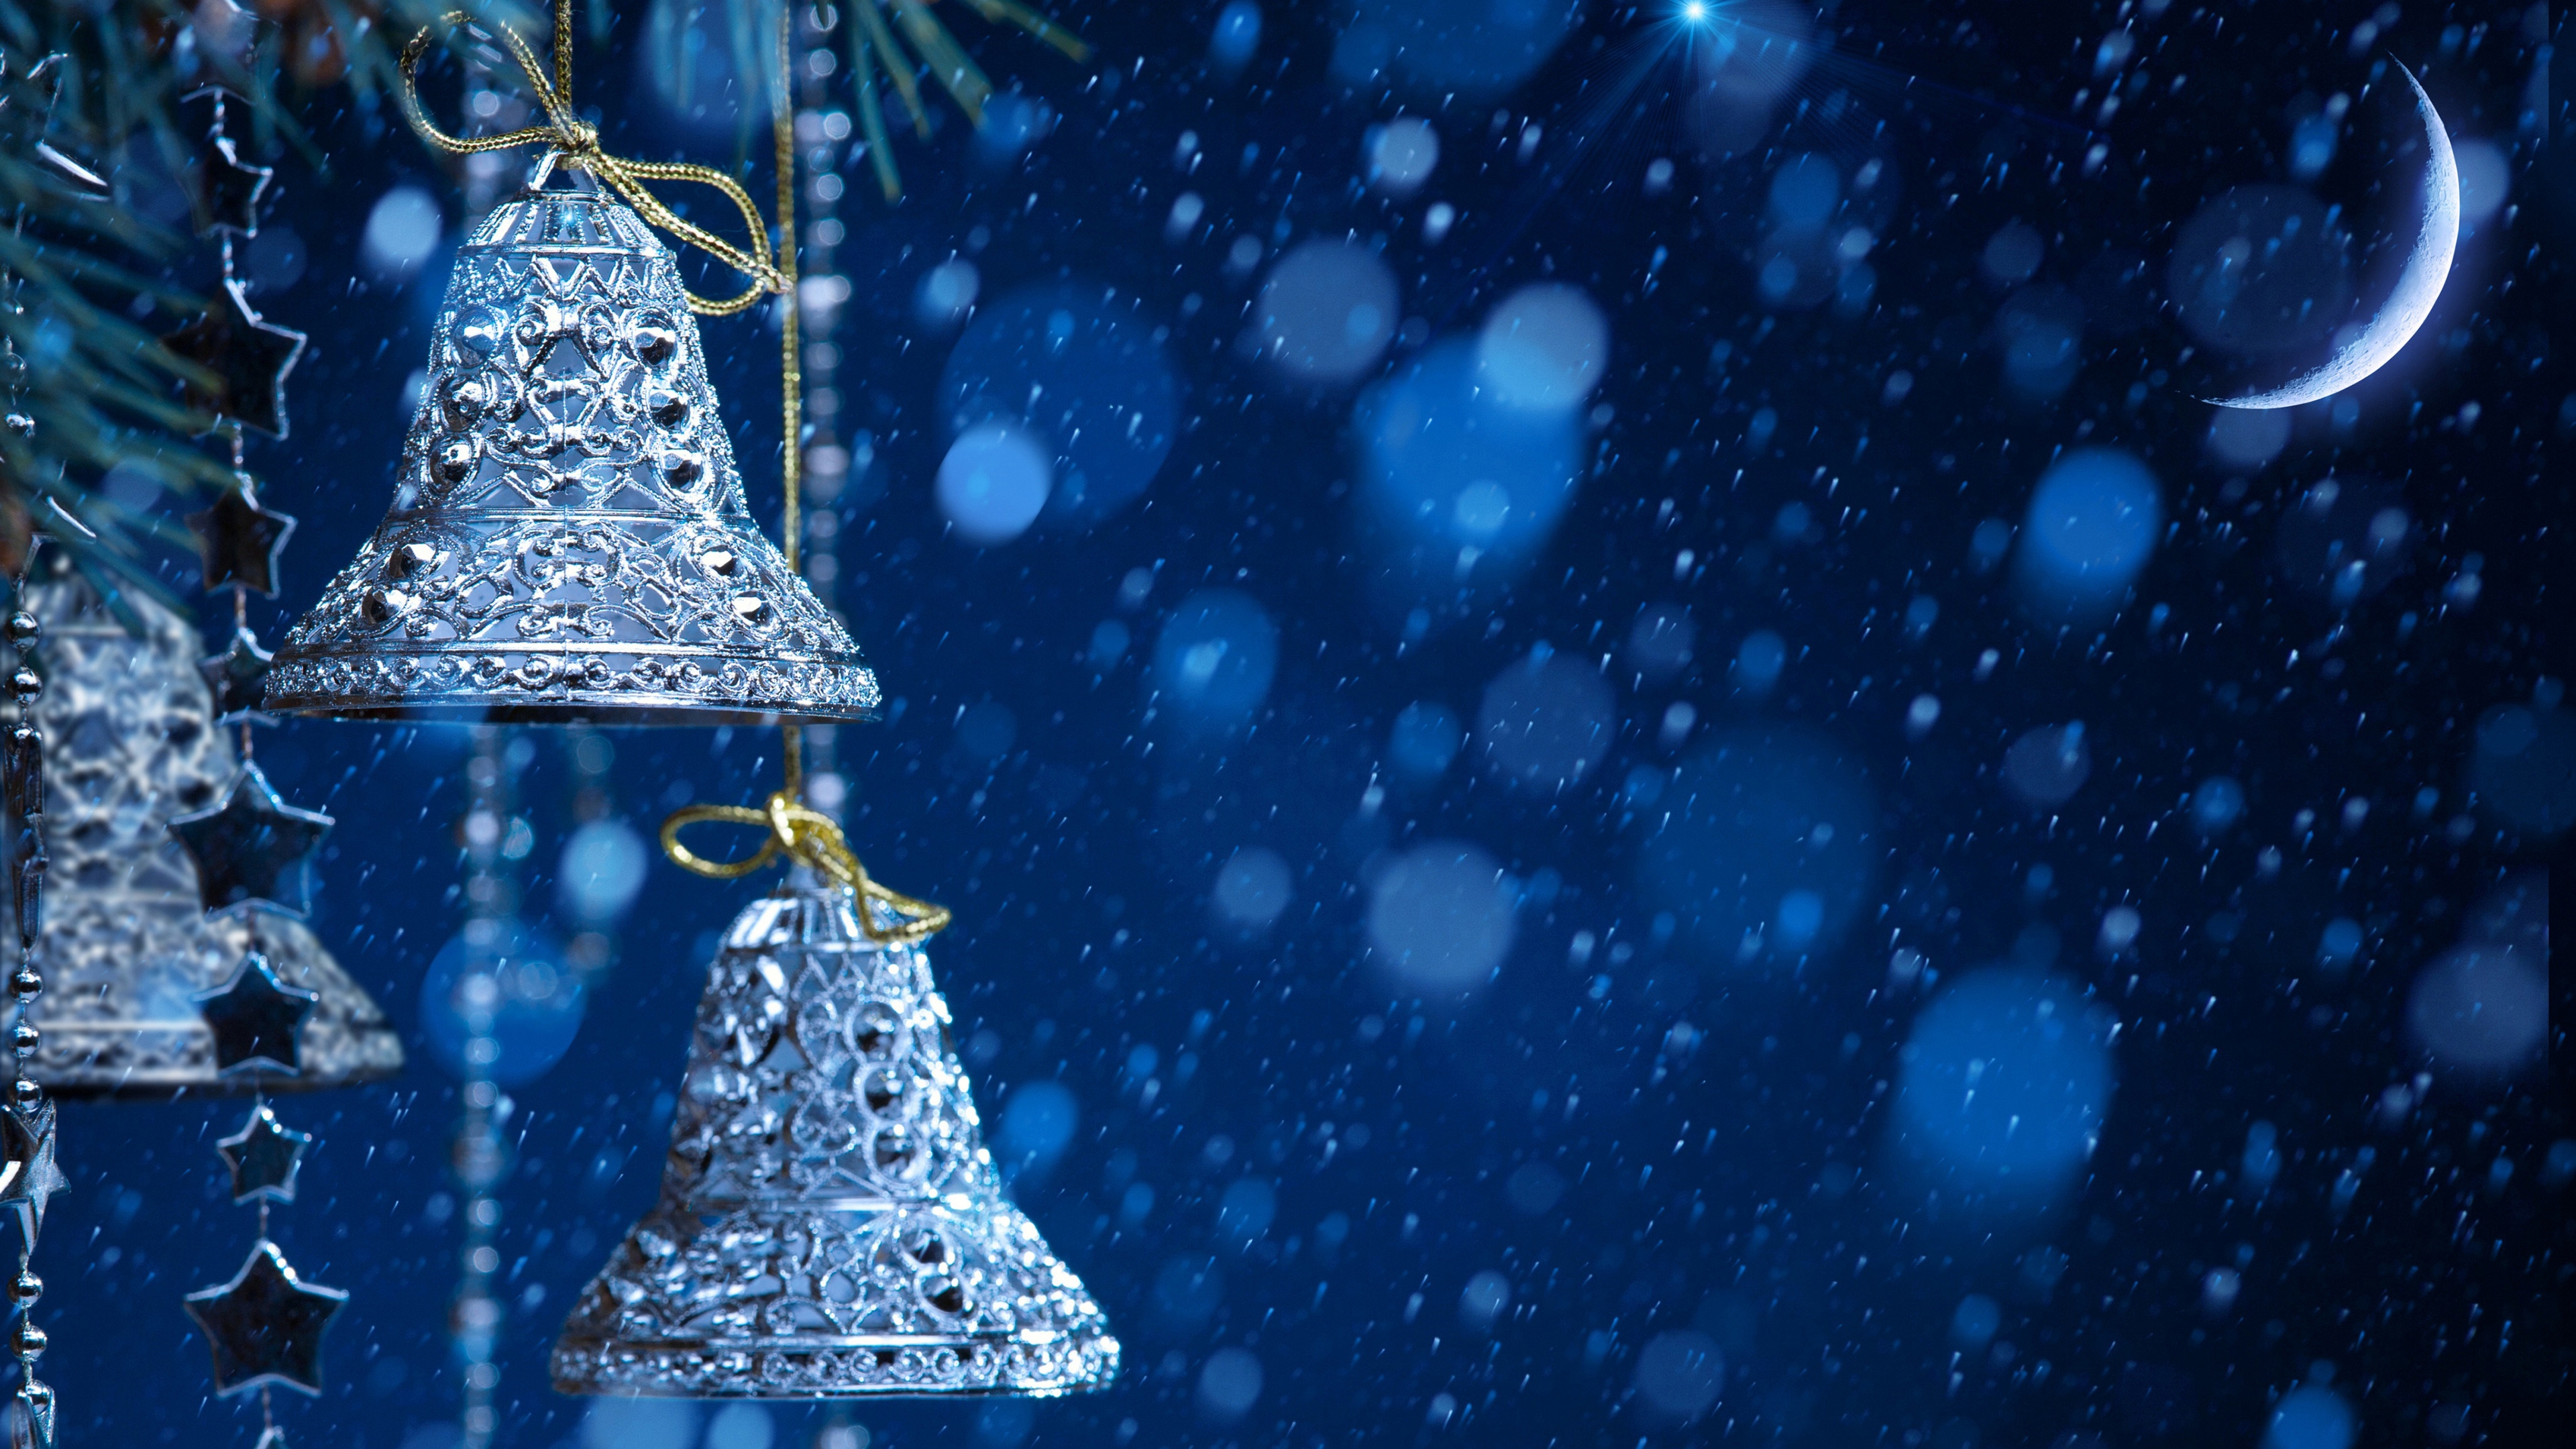 Silver Christmas Bells for 3840 x 2160 Ultra HD resolution